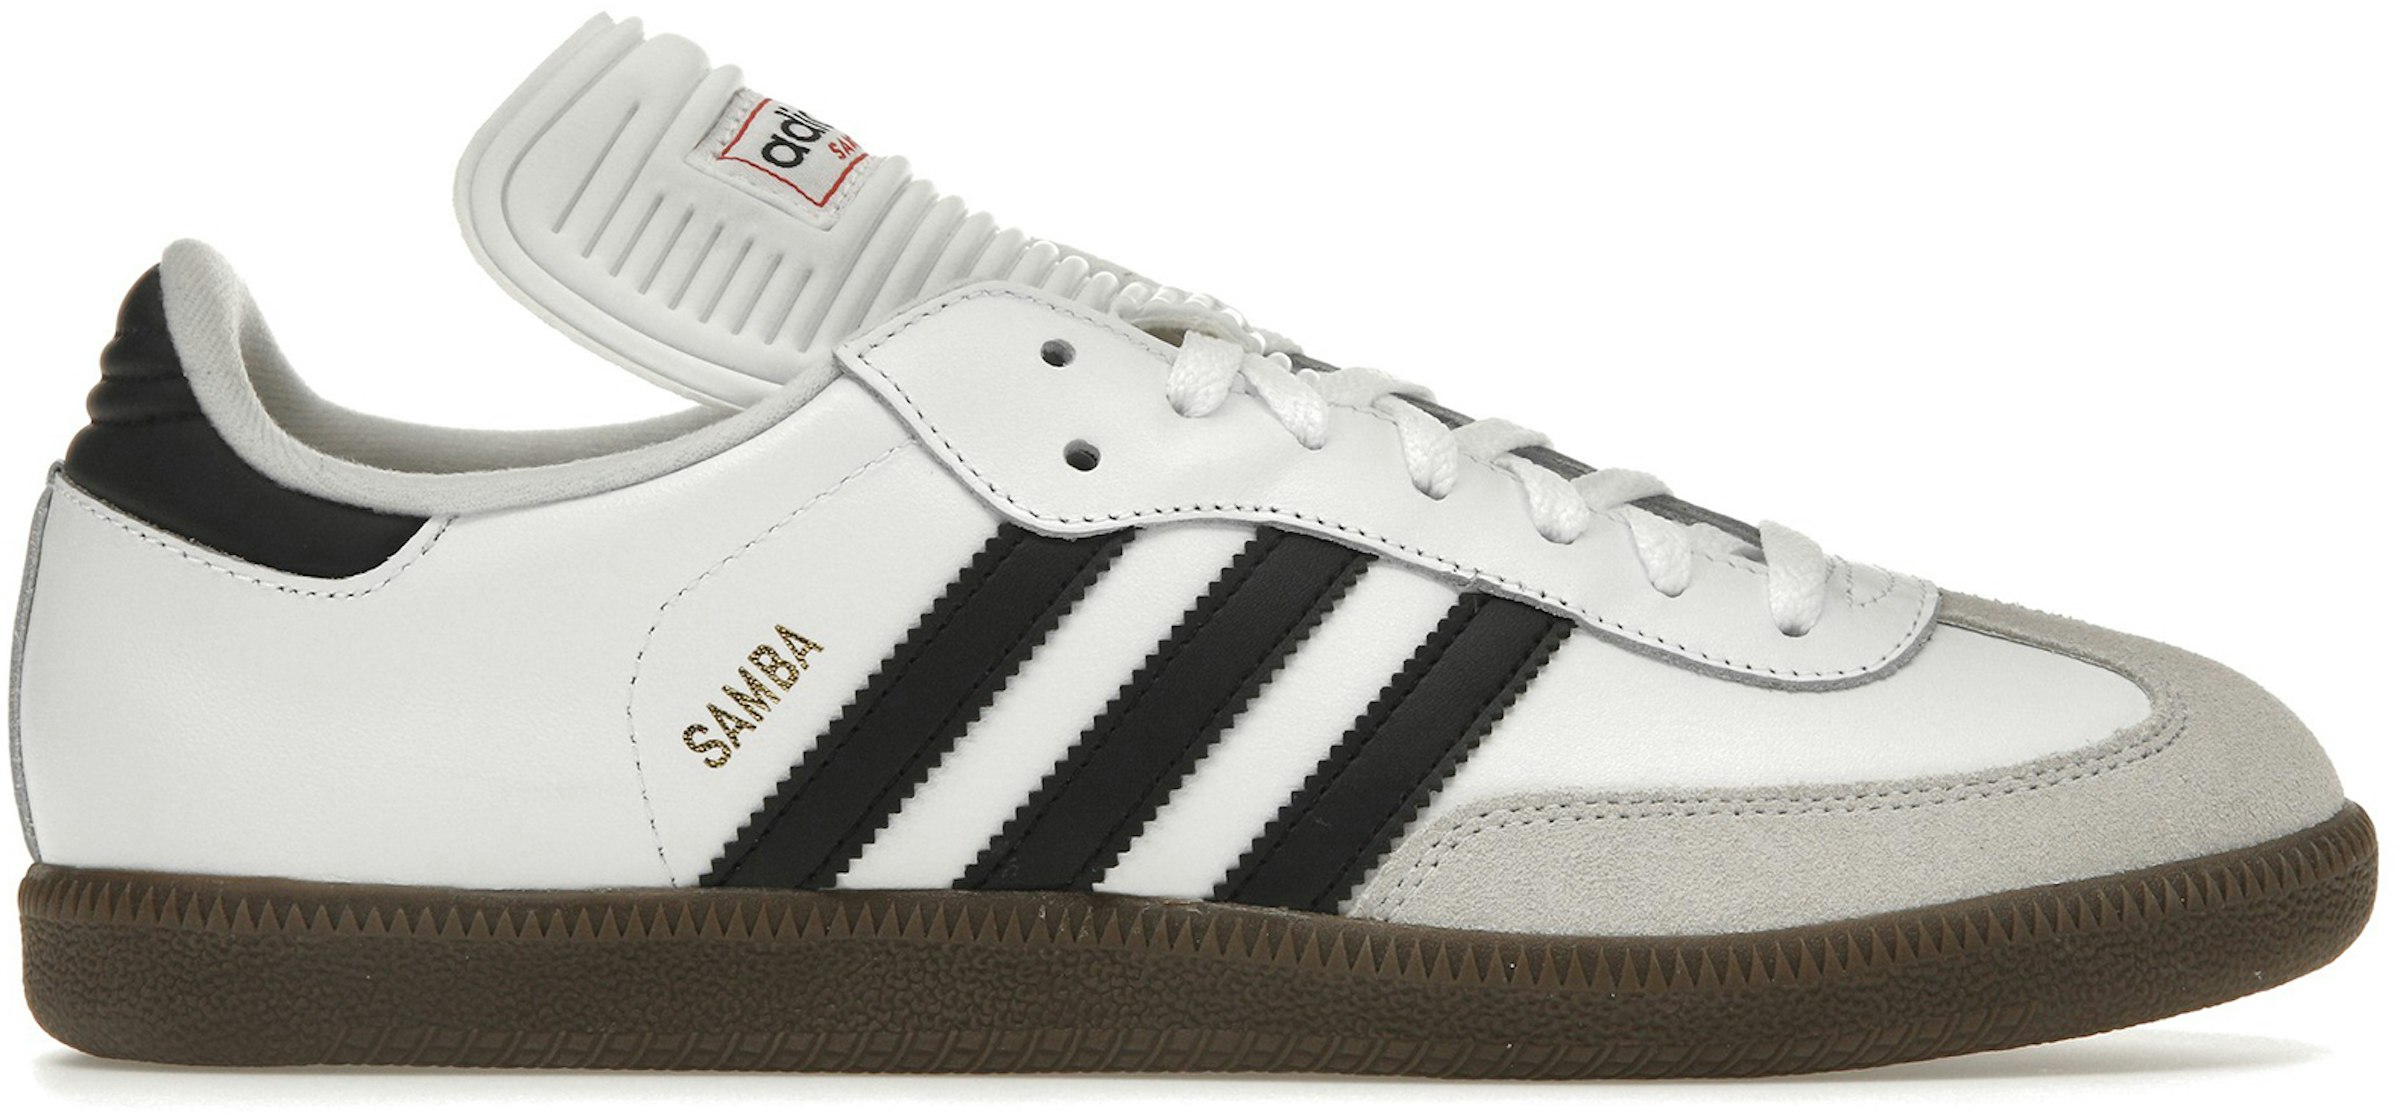 adidas Shoes & New Sneakers -